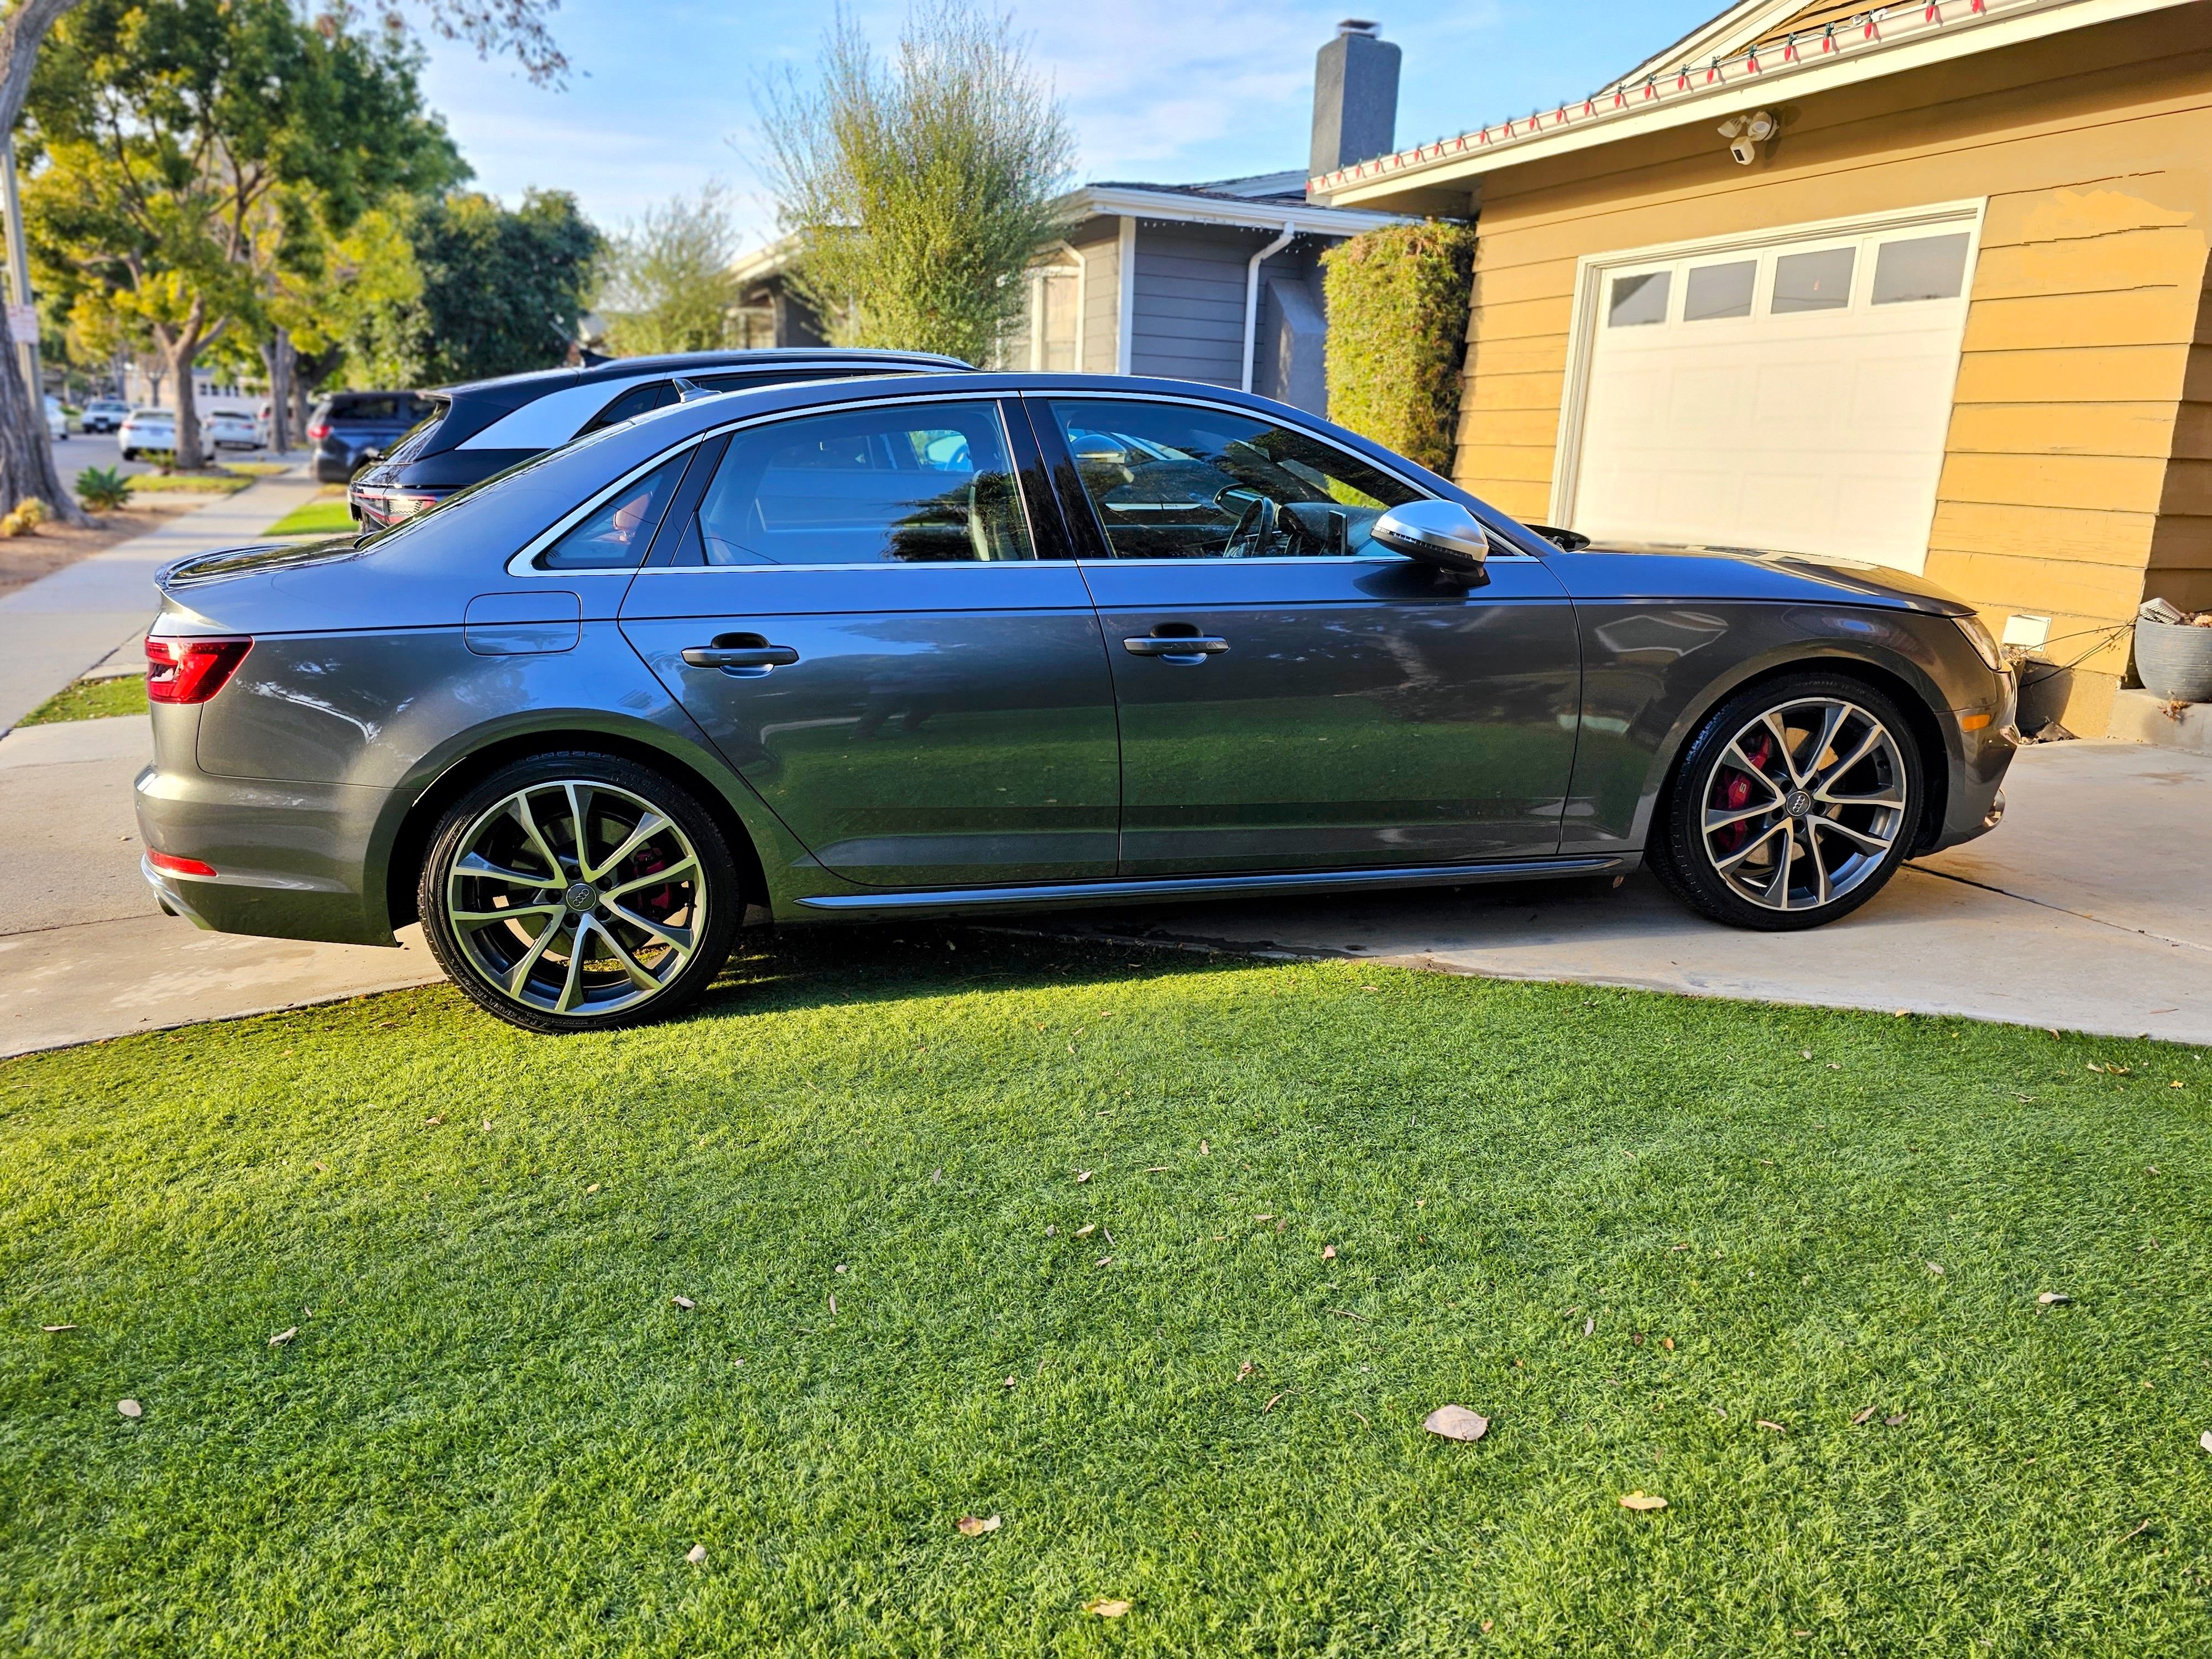 Used 2018 Audi S4 for Sale Right Now - Autotrader